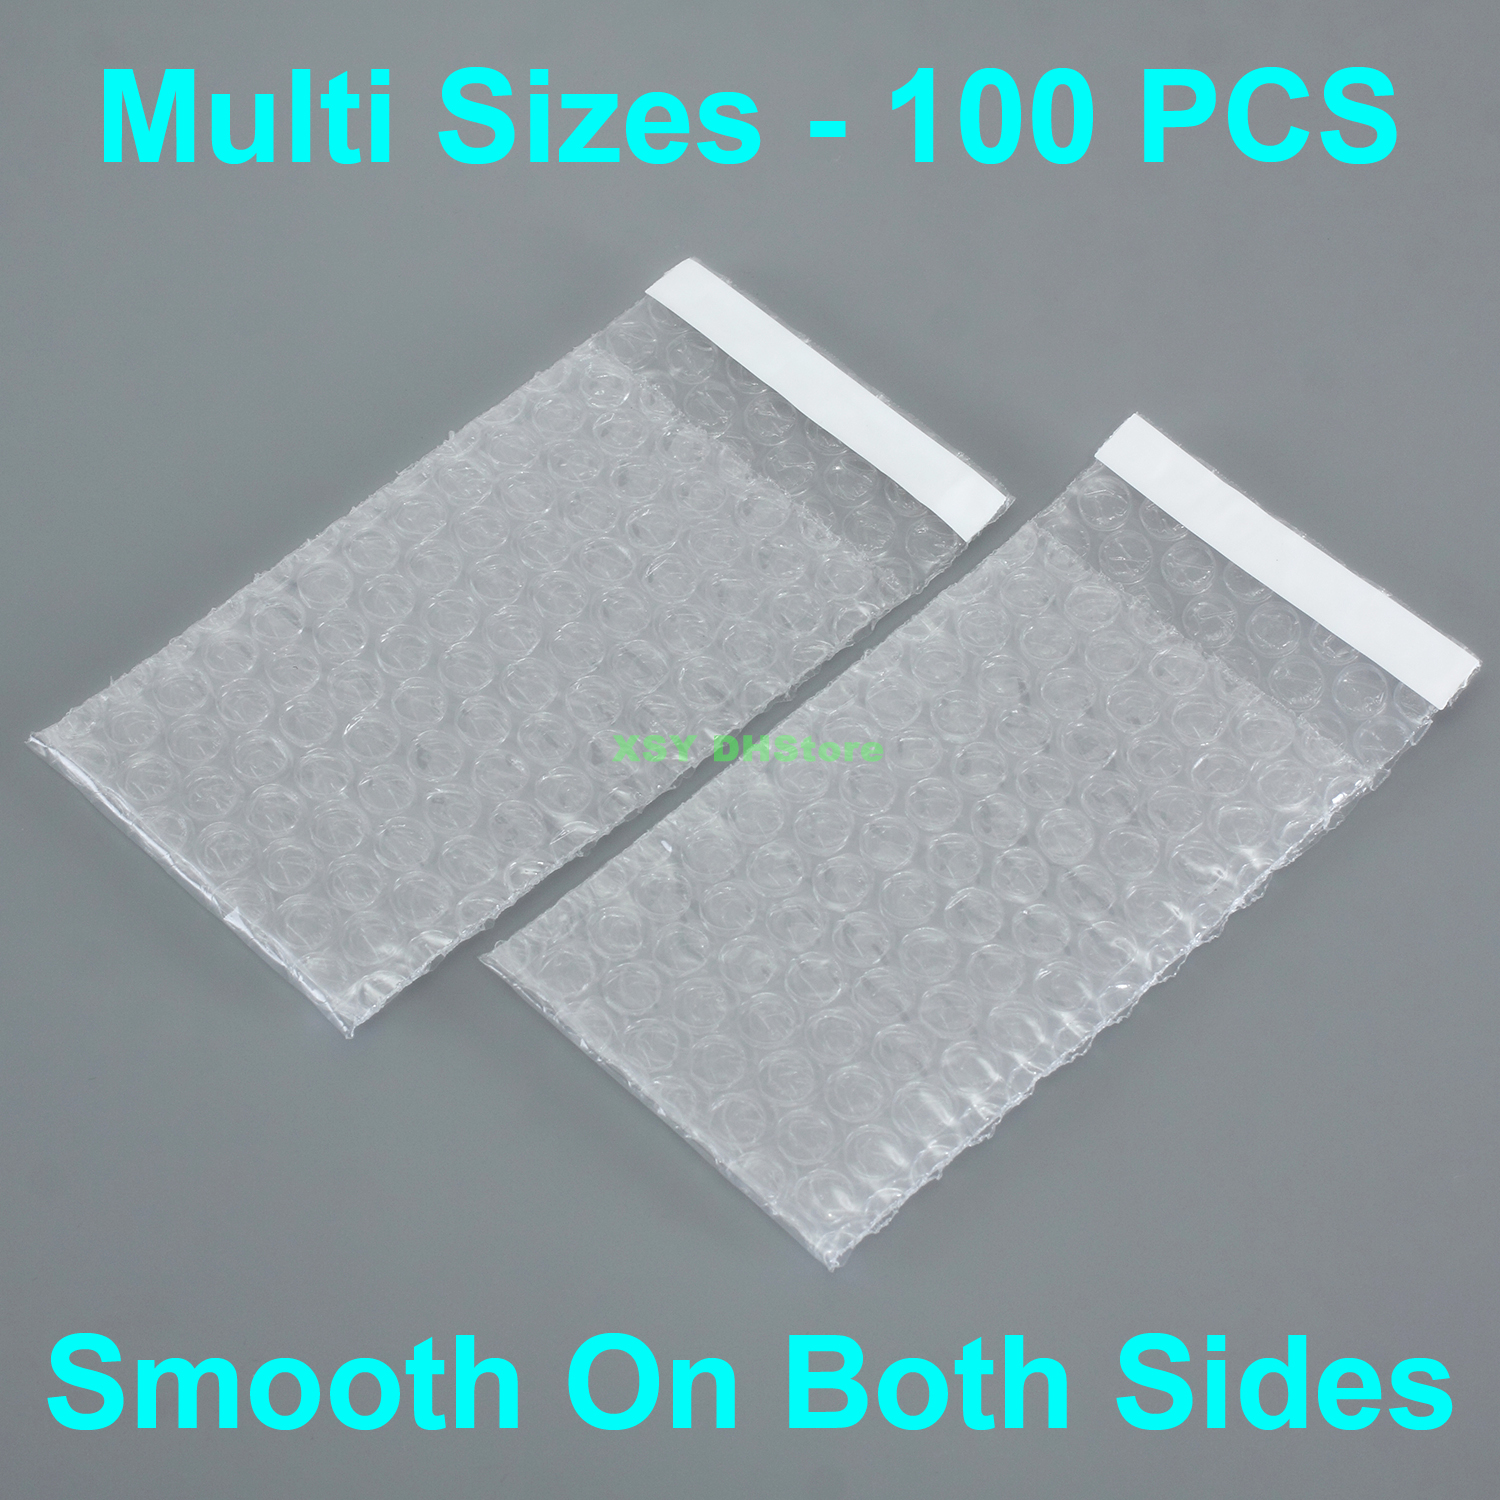 

Multi Sizes 100 PCS Clear Bubble Envelopes Bags Self Seal Packing (Width 2.5" to 6.7", 65 - 170mm) x (Length 3" to 8.7" Inch, 80 - 220mm)